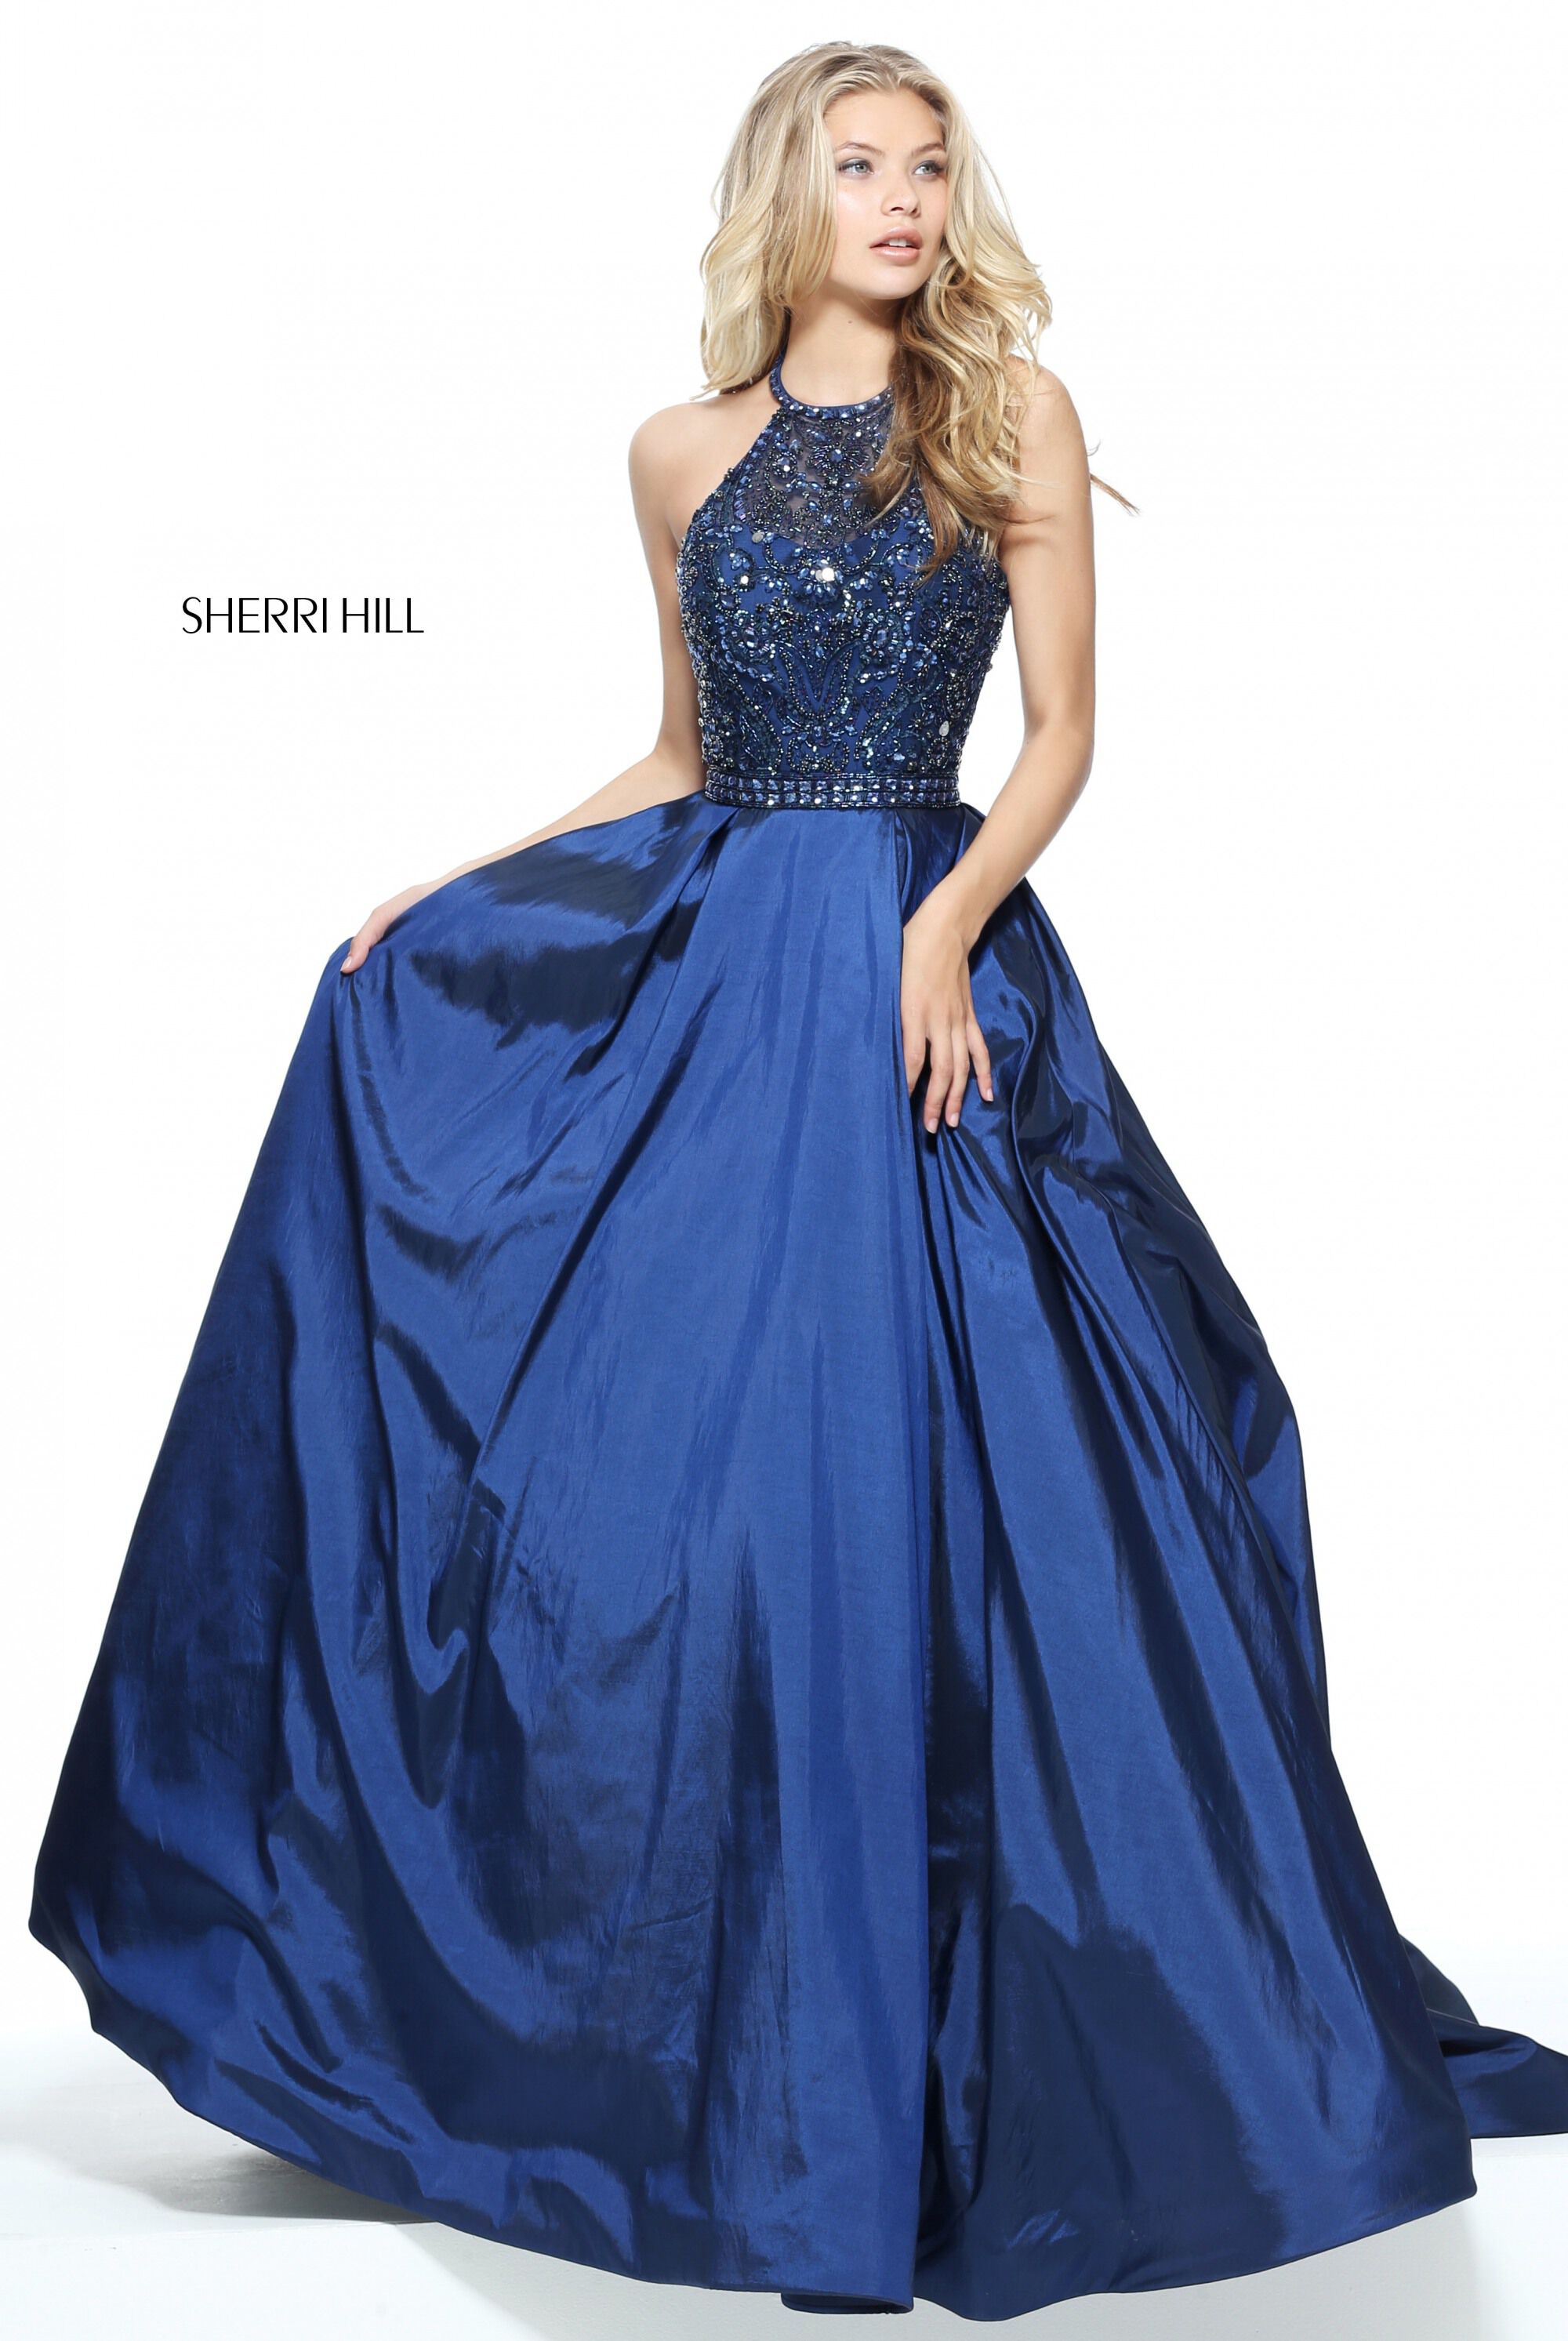 style № 51242 designed by SherriHill